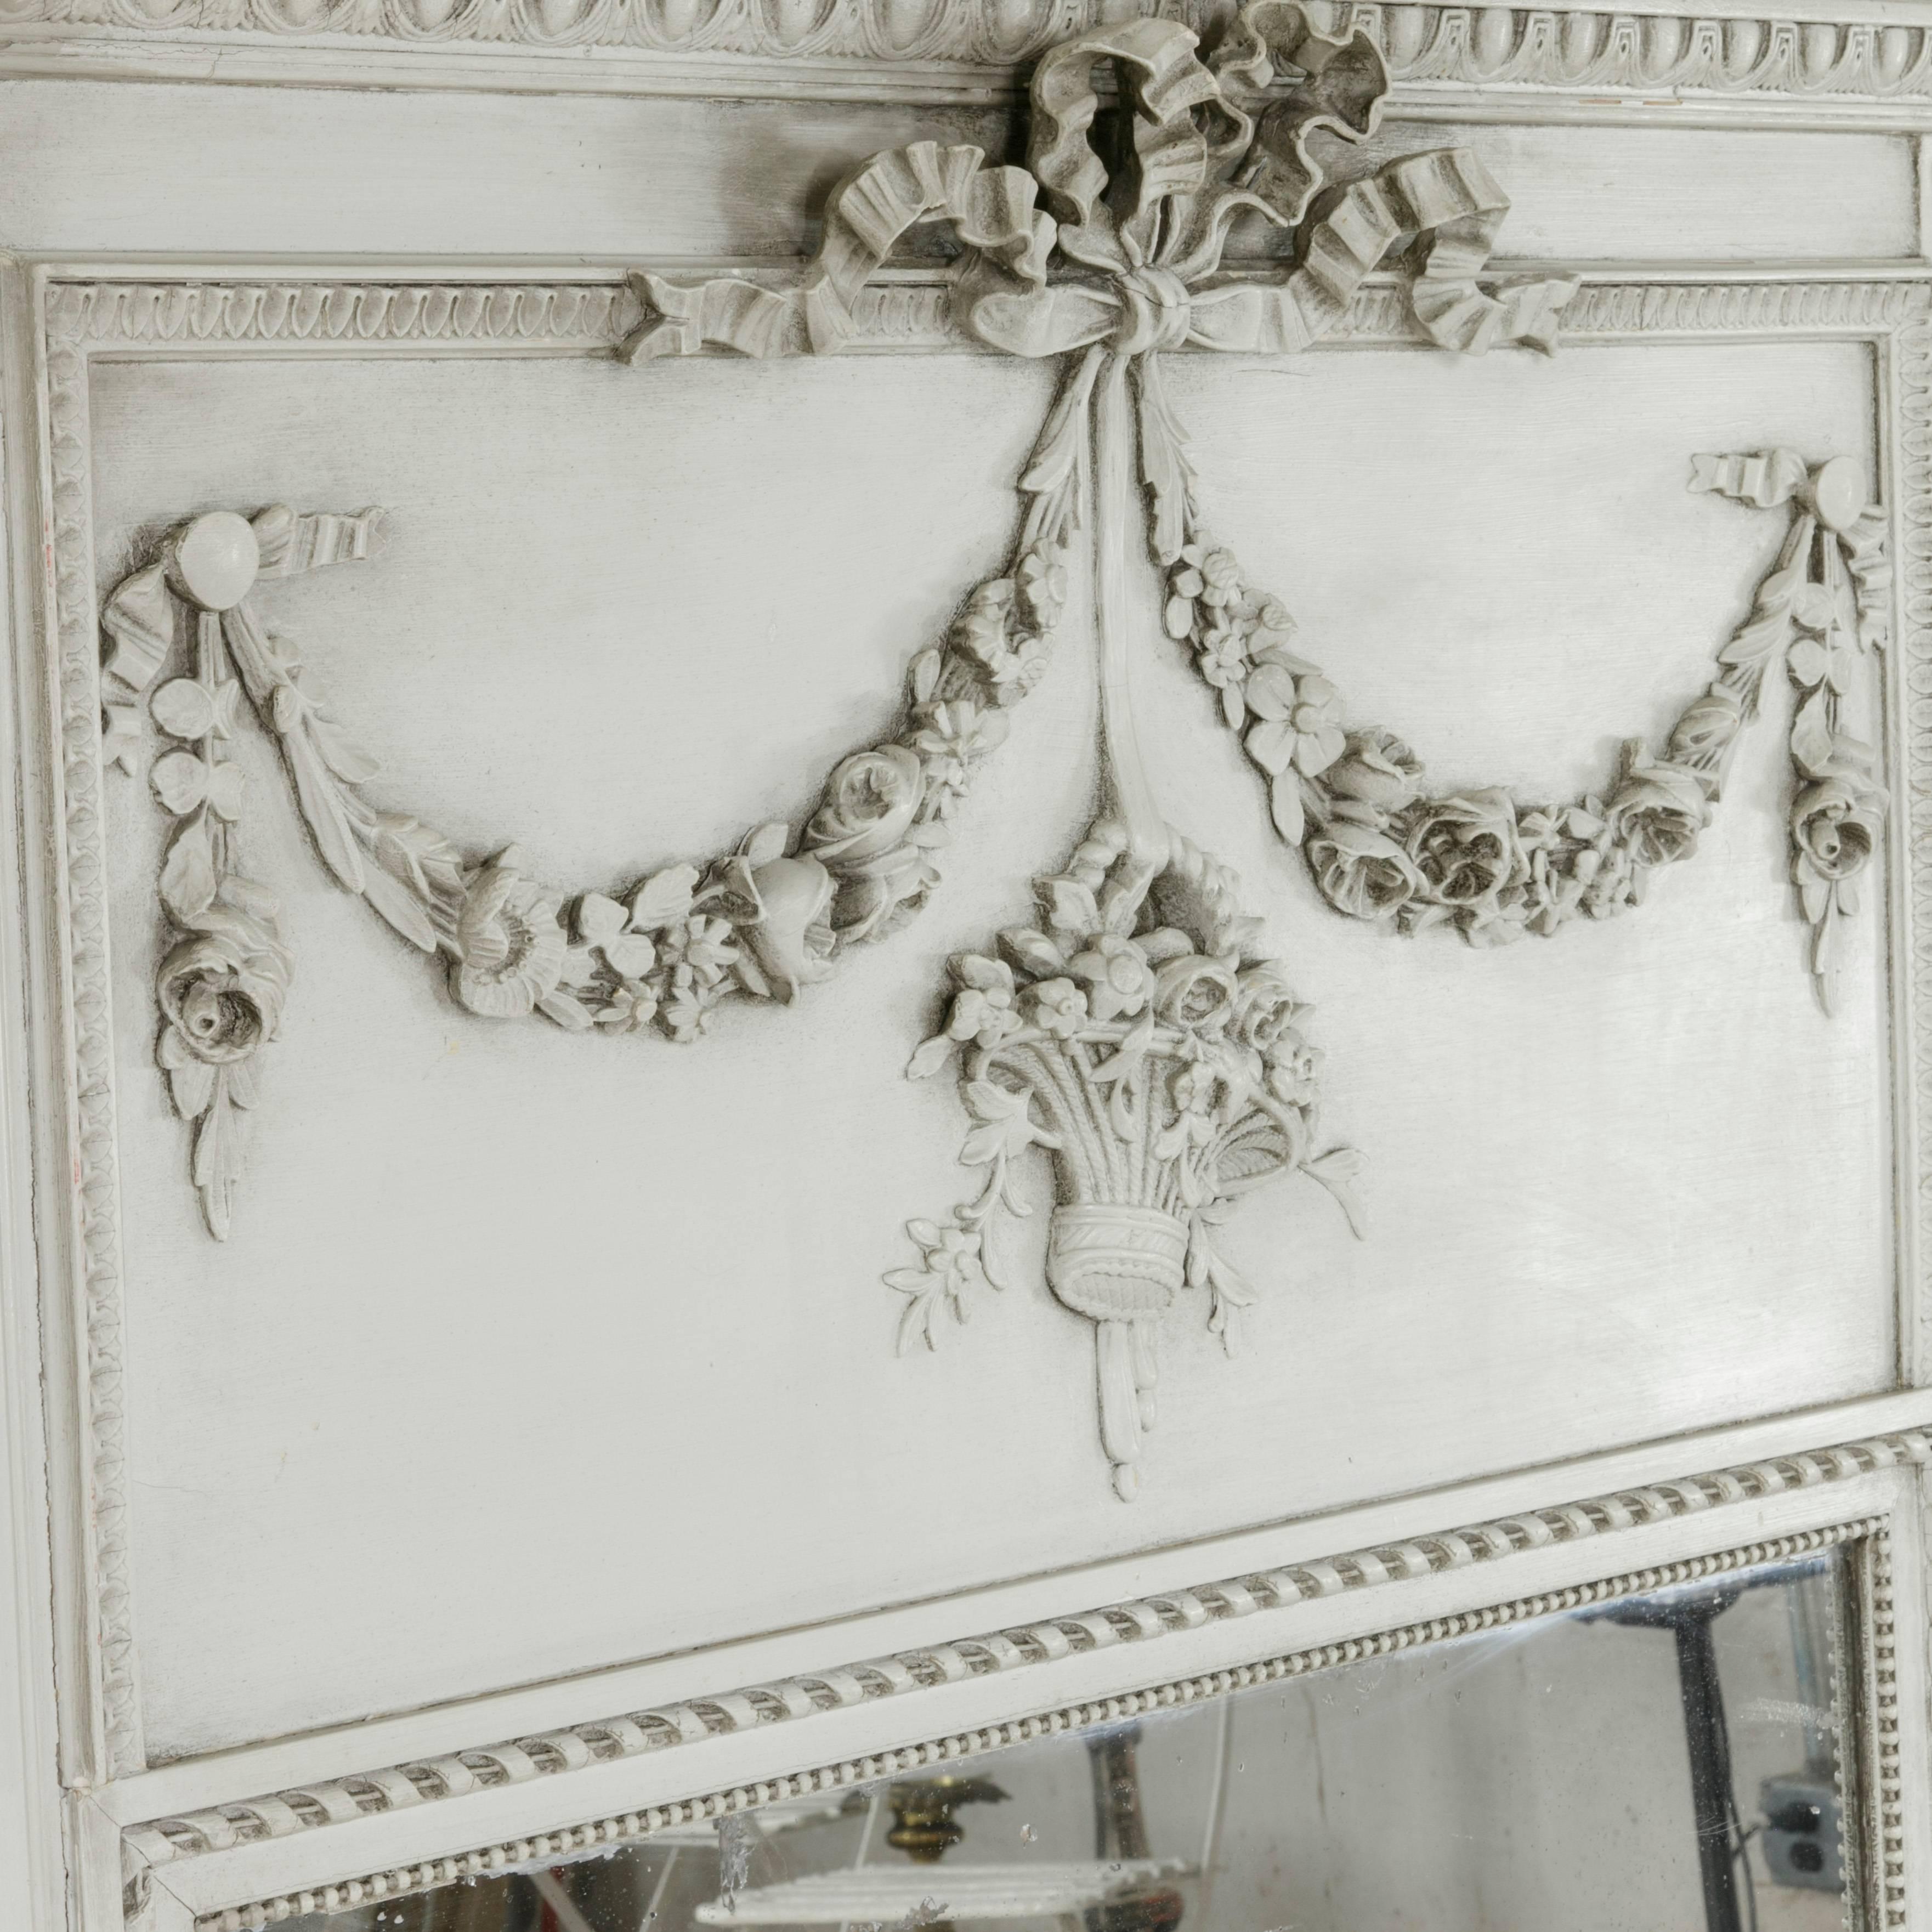 Painted in pale grey, this early twentieth century Louis XVI style trumeau mirror was originally part of a boiseries above the mantel of a French manor house. With beading and scrolled ribbon bordering its original mercury mirror, this piece